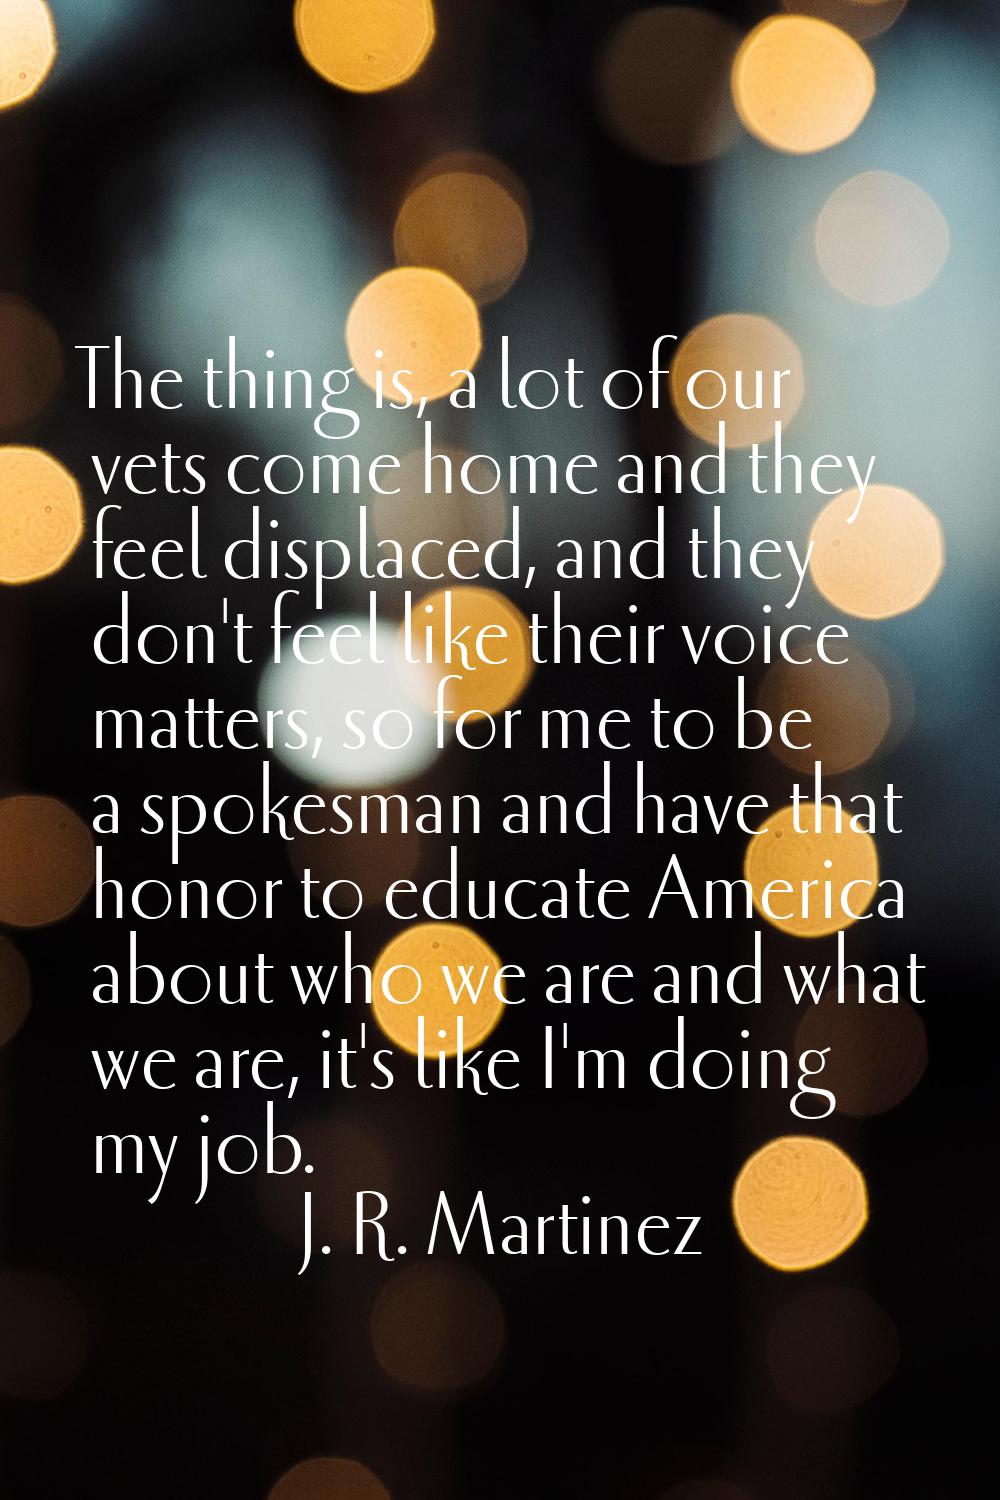 The thing is, a lot of our vets come home and they feel displaced, and they don't feel like their v